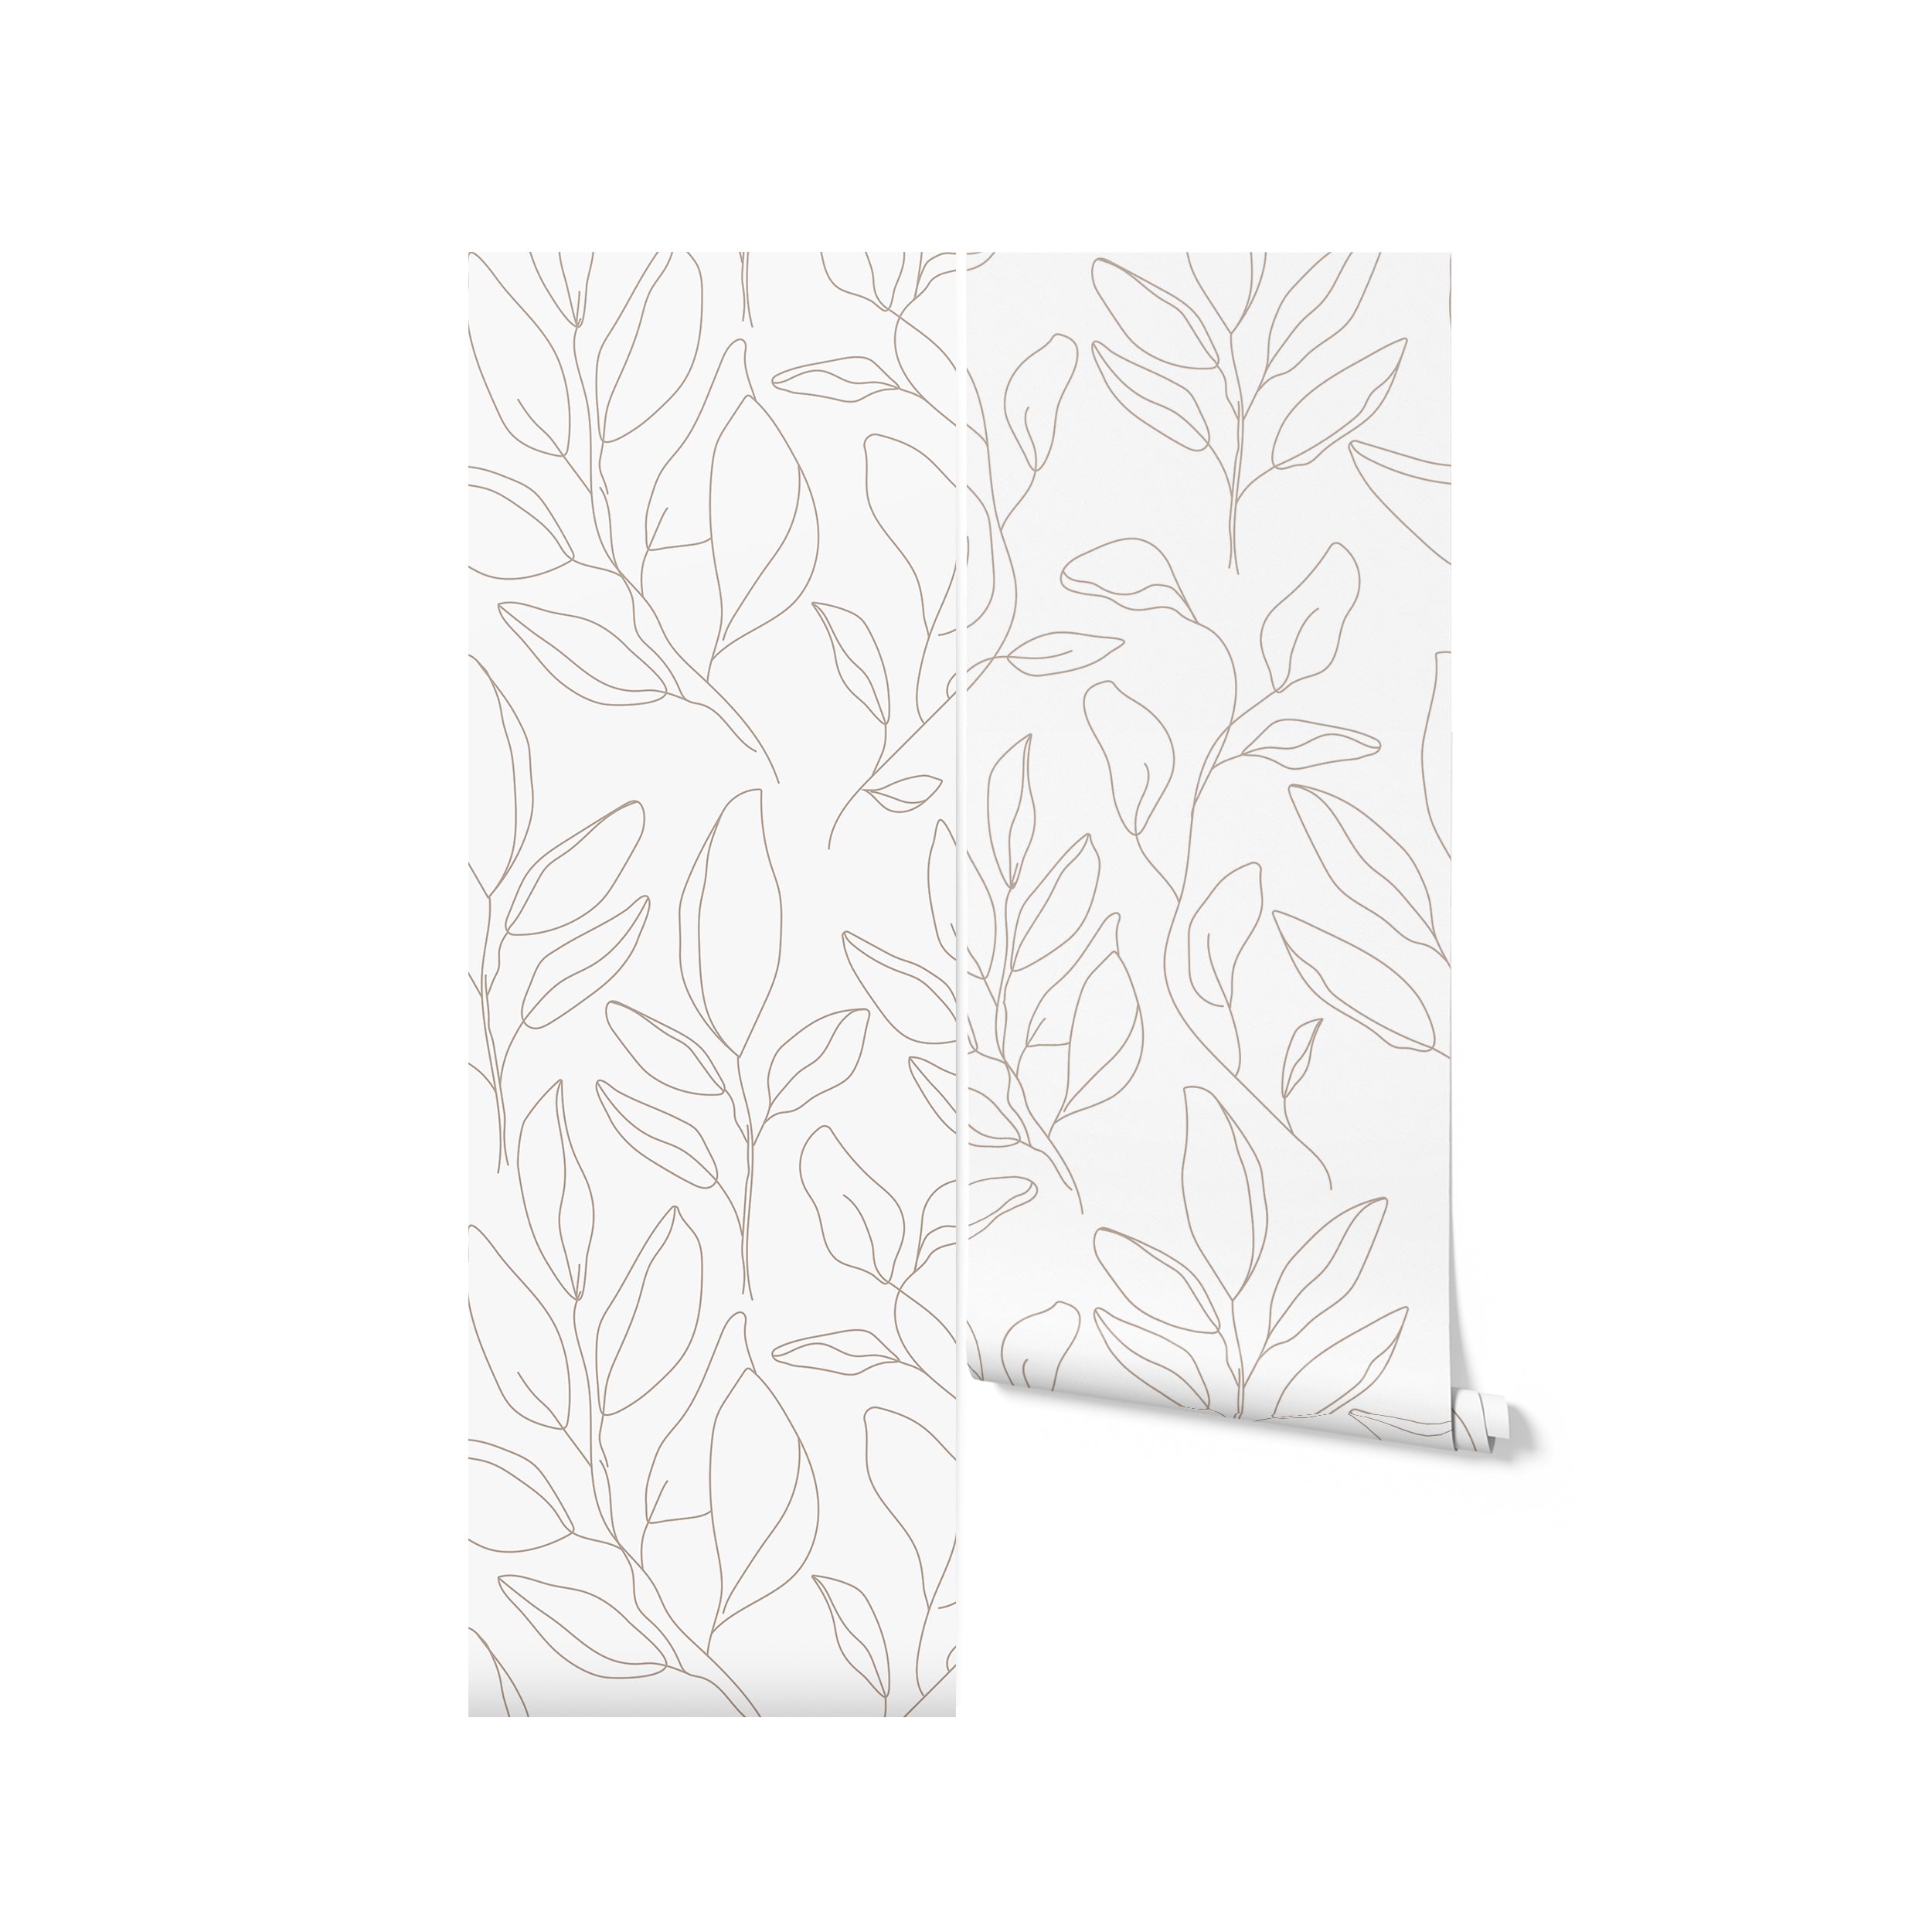 Floral Line Abstract Wallpaper - Beige displayed in two vertical panels, showcasing the elegant and minimalist line art design of abstract leaves in beige on a light background, perfect for adding a touch of sophistication to any room.